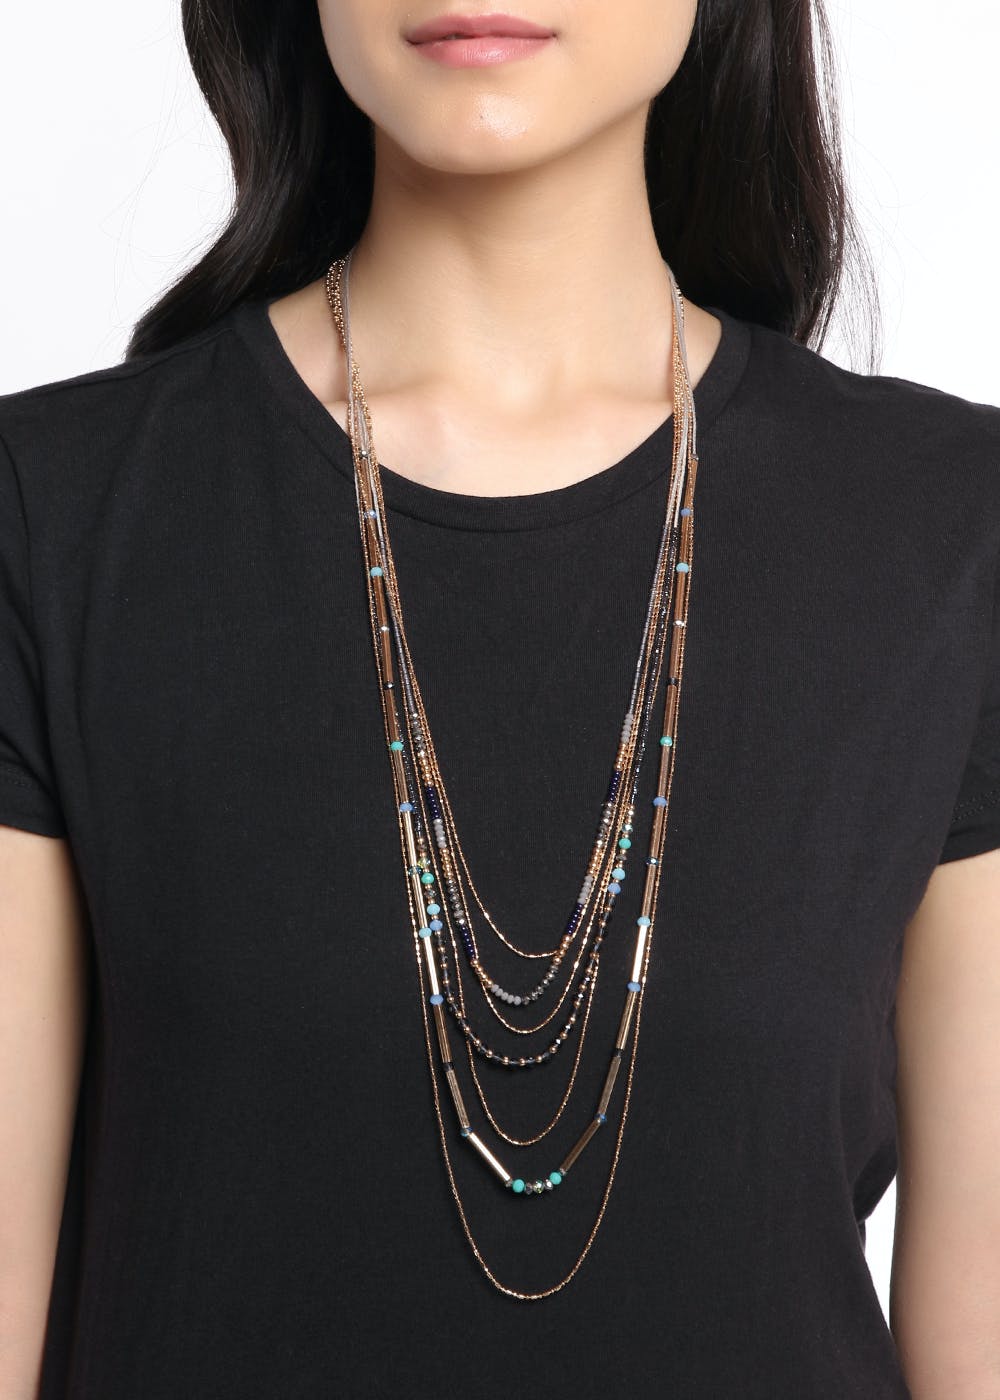 Blue & Gold Beaded Multi Layered Necklace